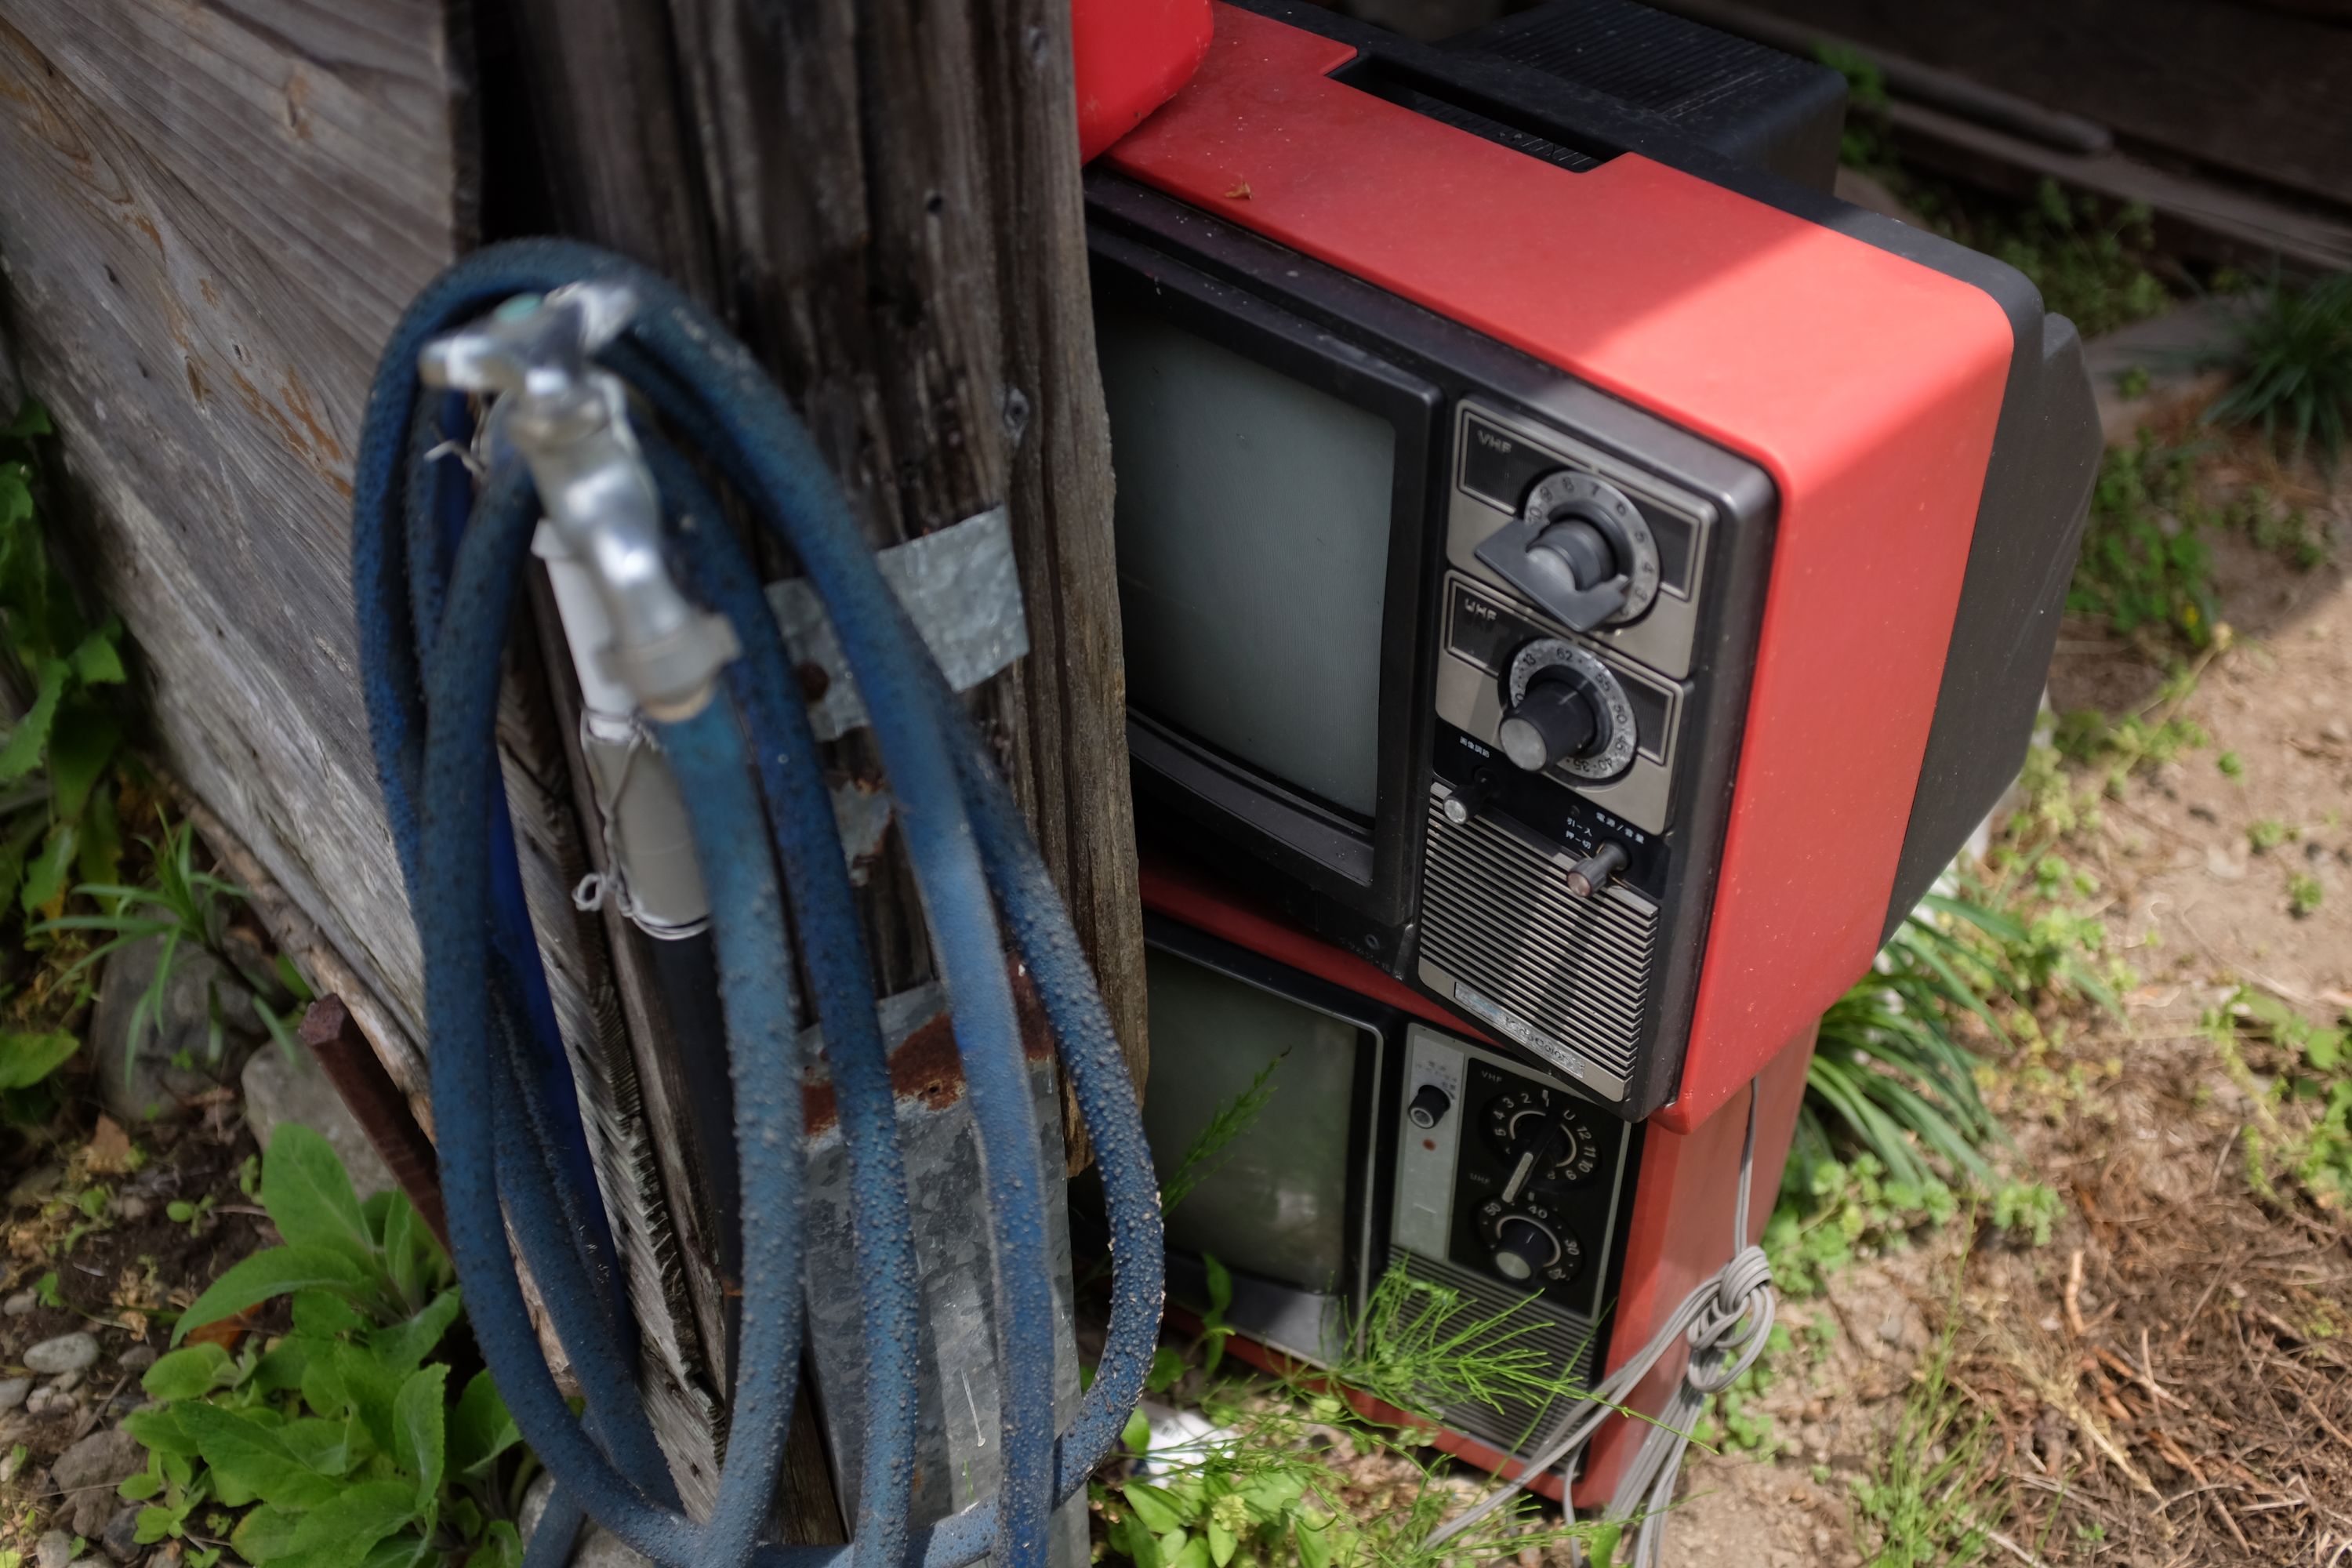 A coiled-up blue hose and two old red televisions in a shed overgrowing with weeds.